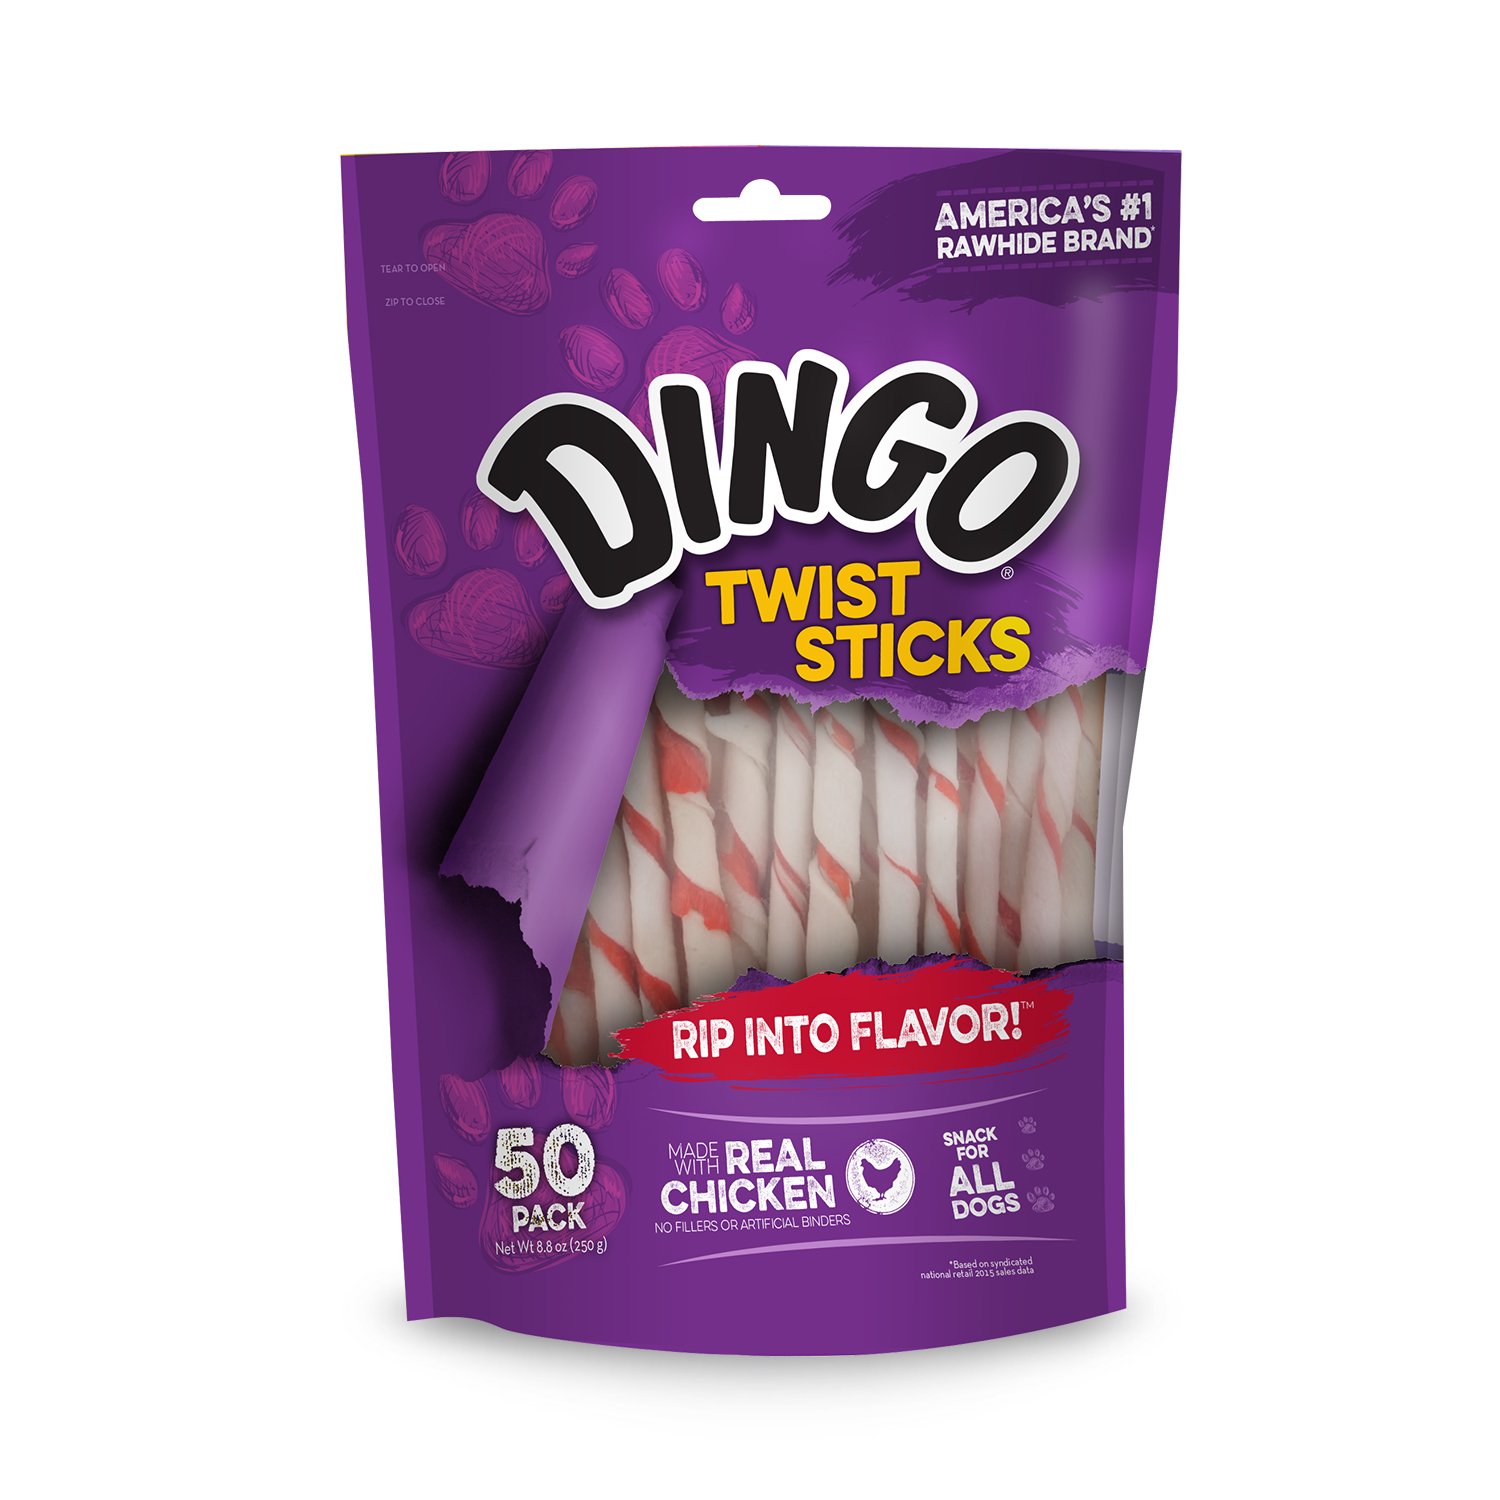 Dingo Twist Sticks Rawhide Chews, Made With Real Chicken, 50 Count for $1